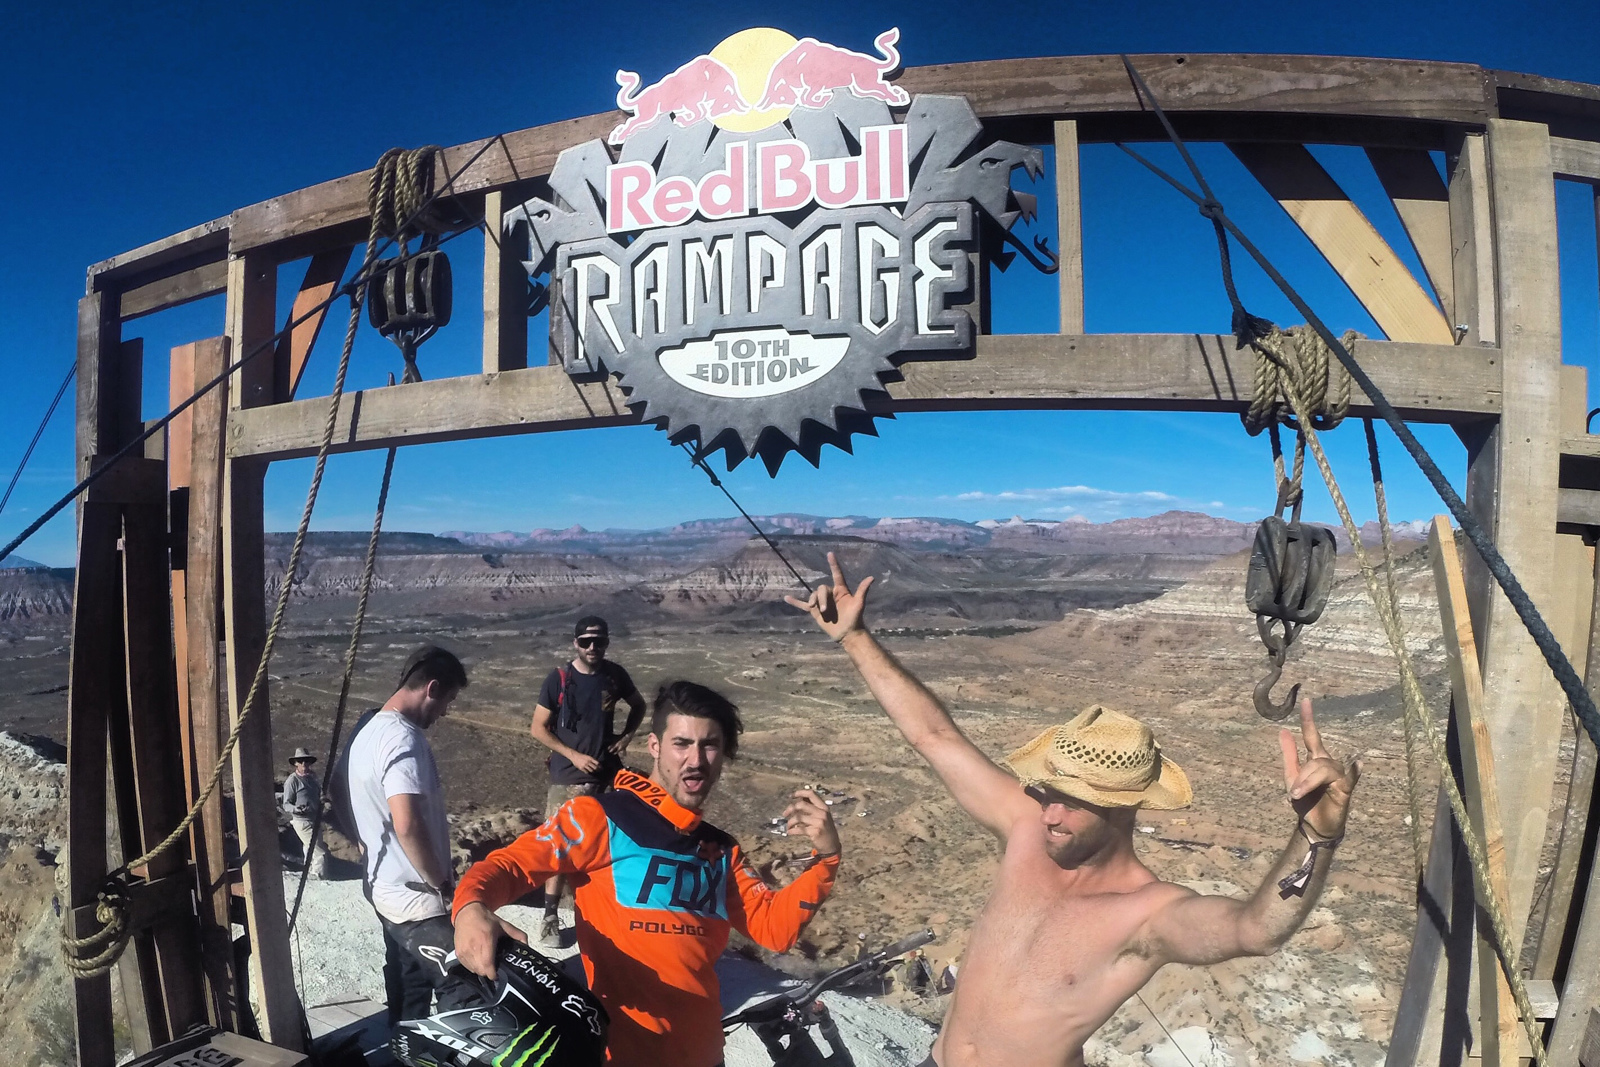 At the top of the Red Bull Rampage with Sam Reynolds in 2015